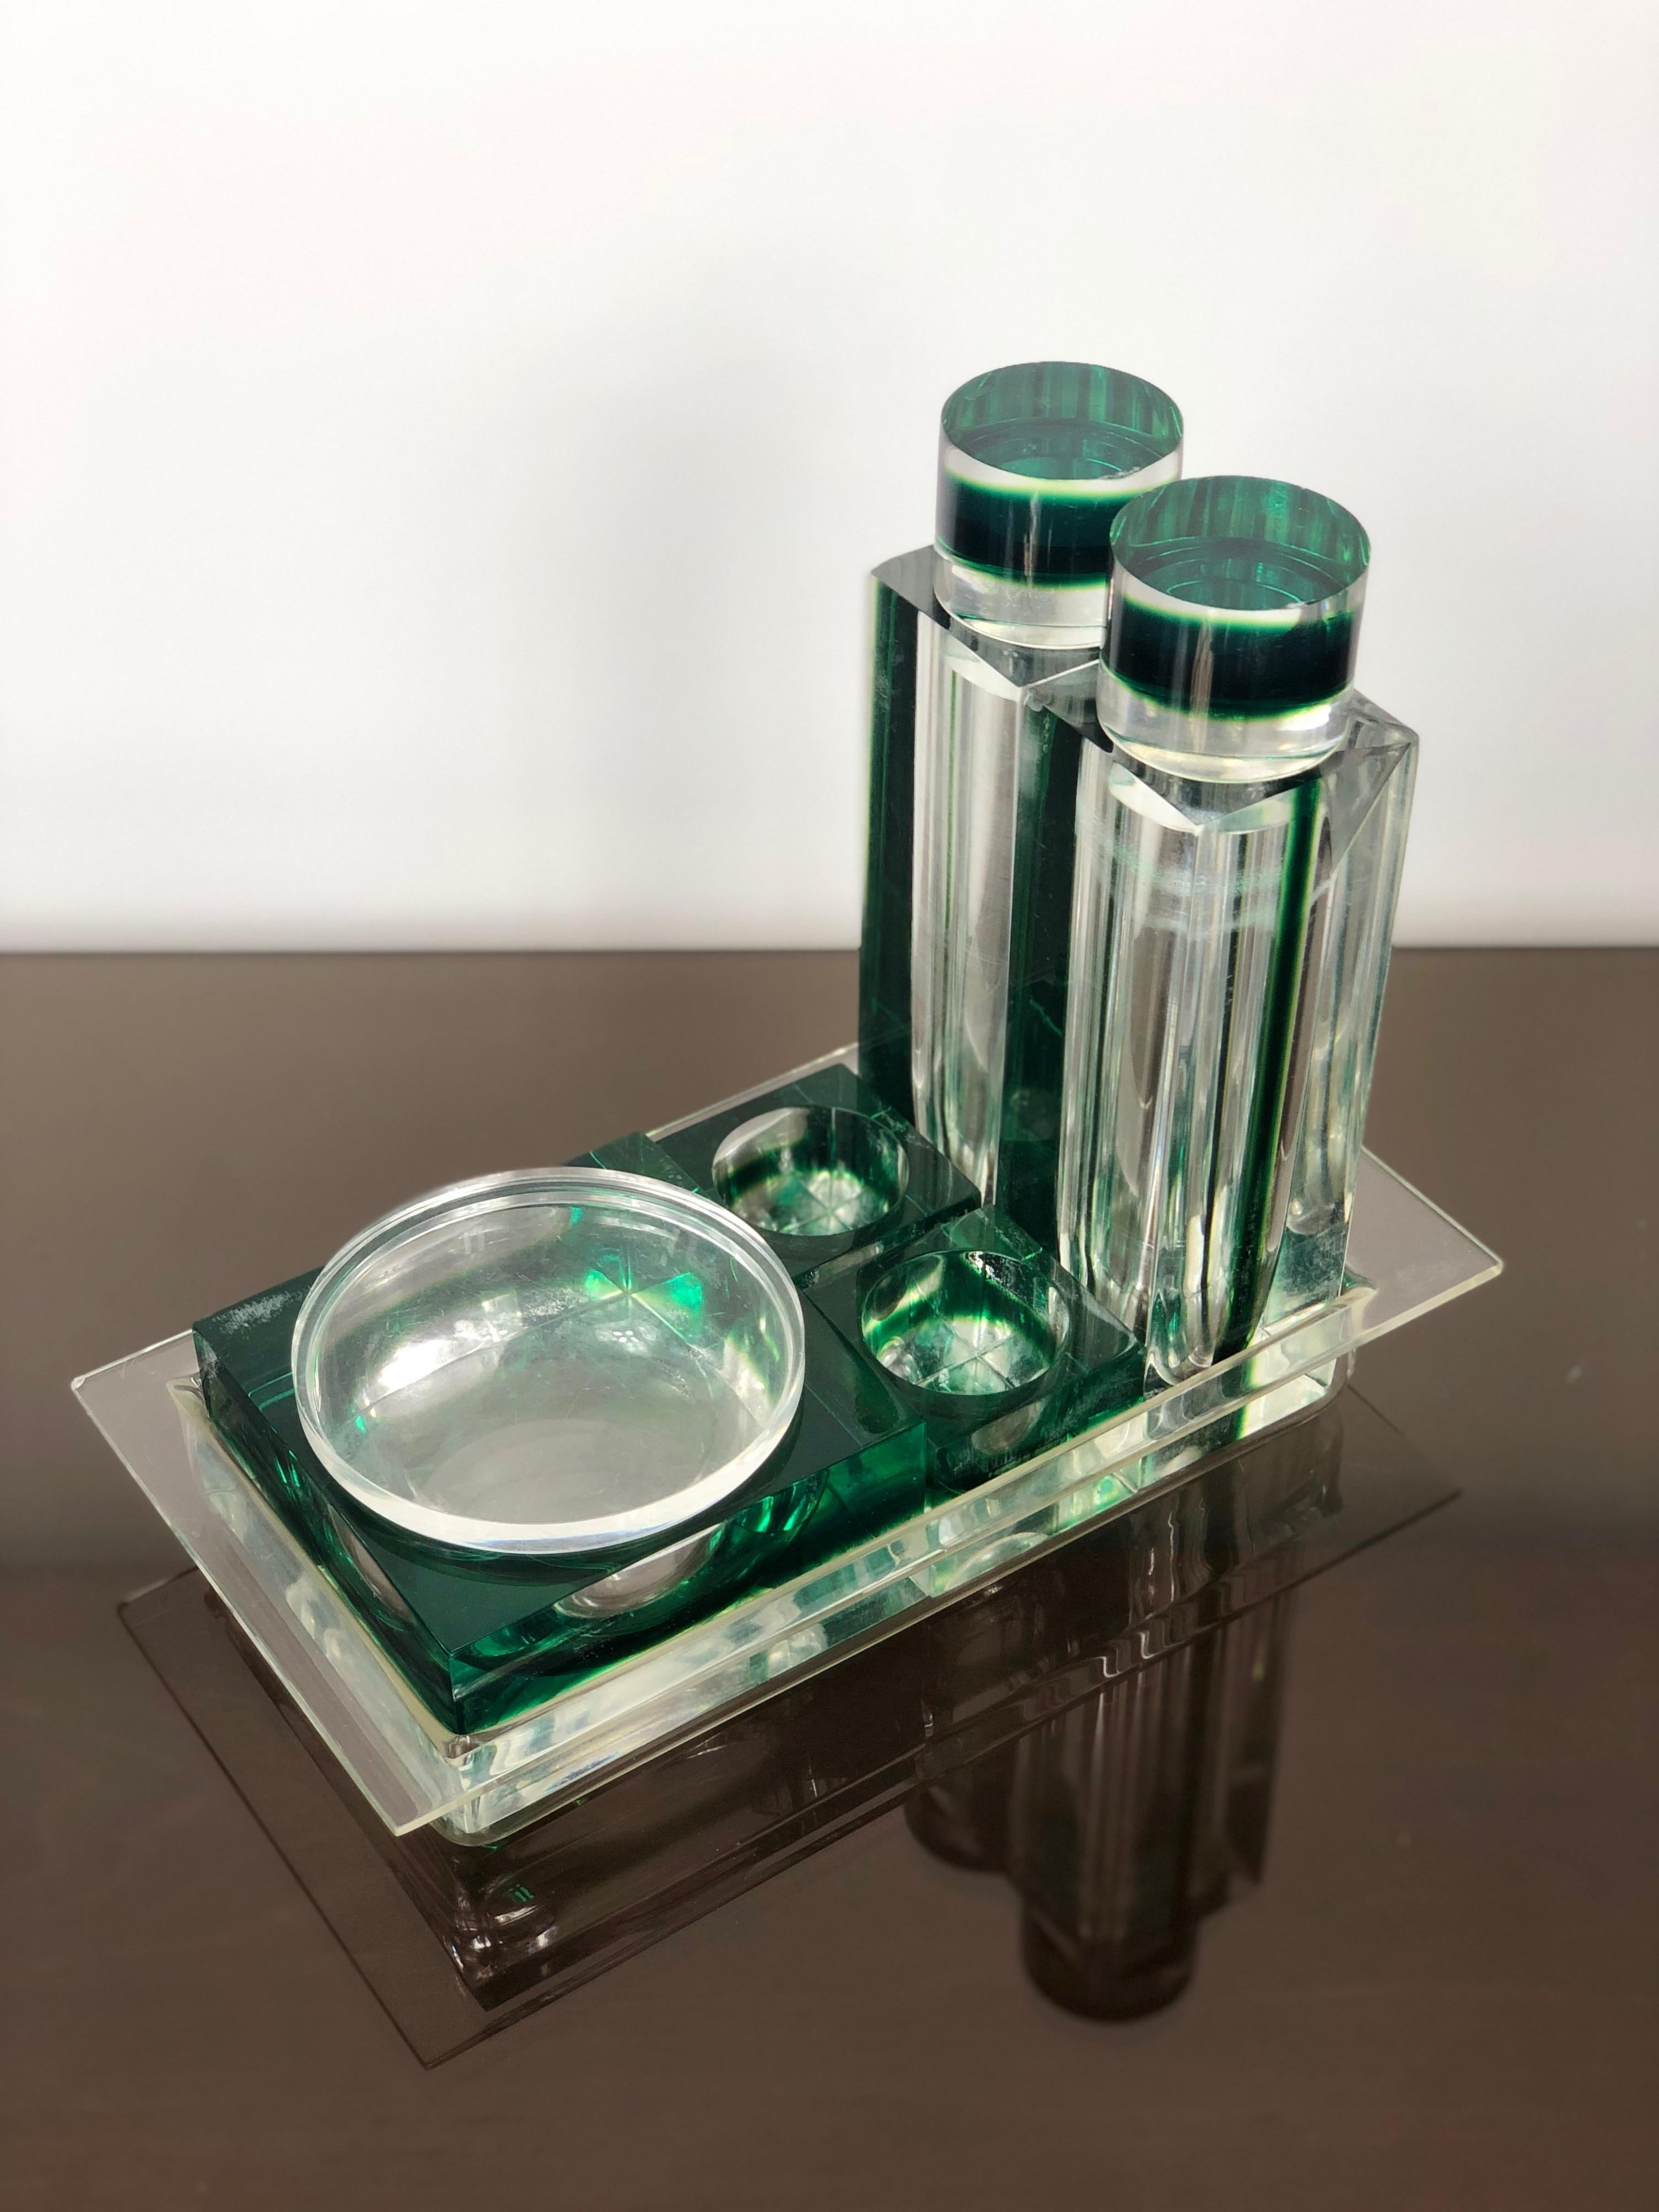 Table set for pepper, salt, parmesan etc. in green Lucite made by Guzzini, Italy, 1970s.